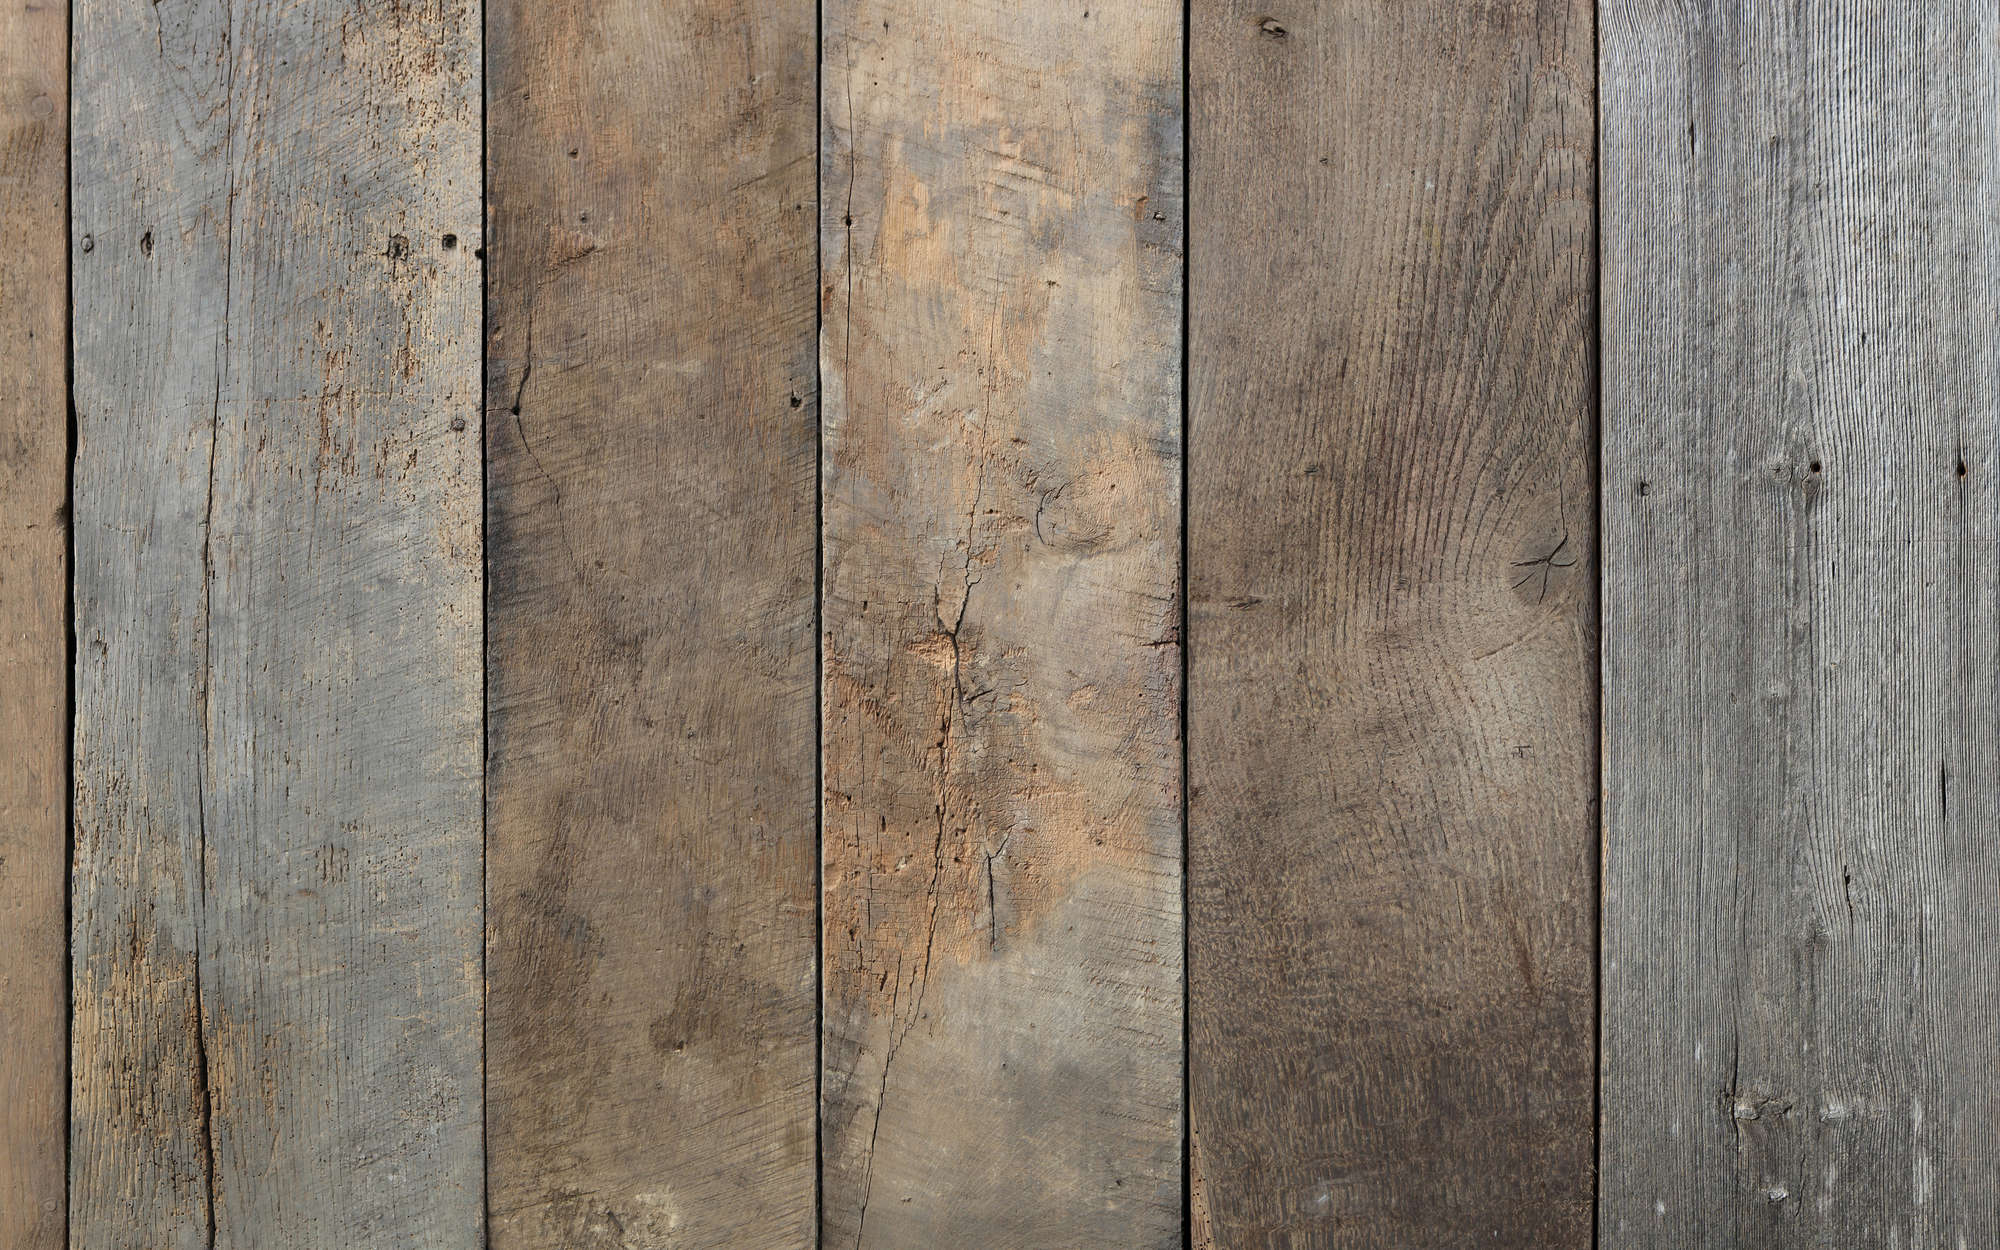             Old wooden floorboards mural - Textured non-woven
        